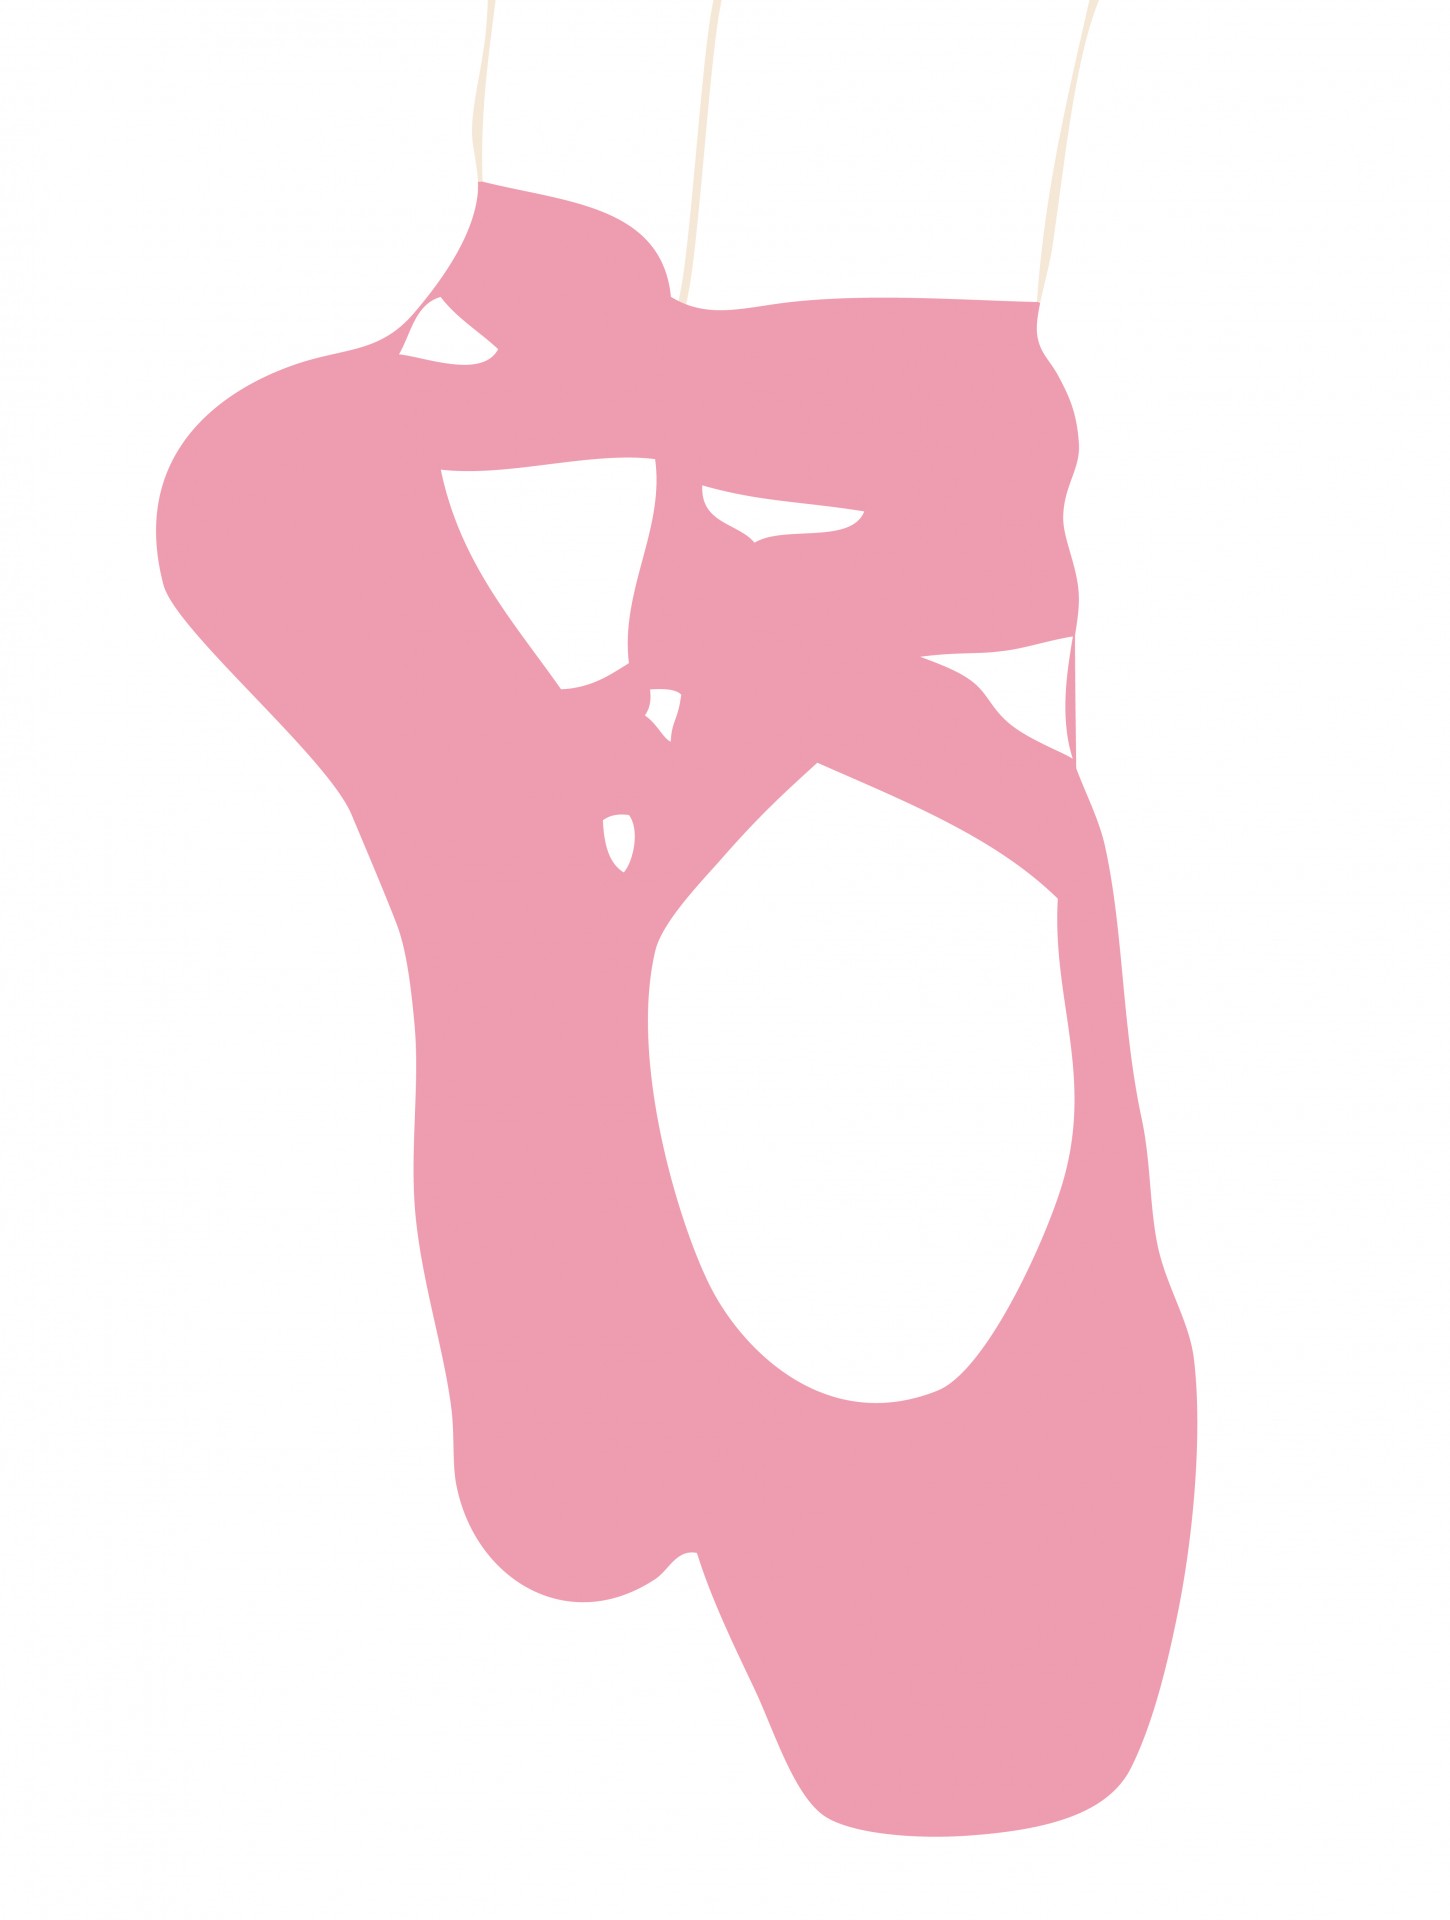 Pretty pink ballet shoes in pink clipart for scrapbooking